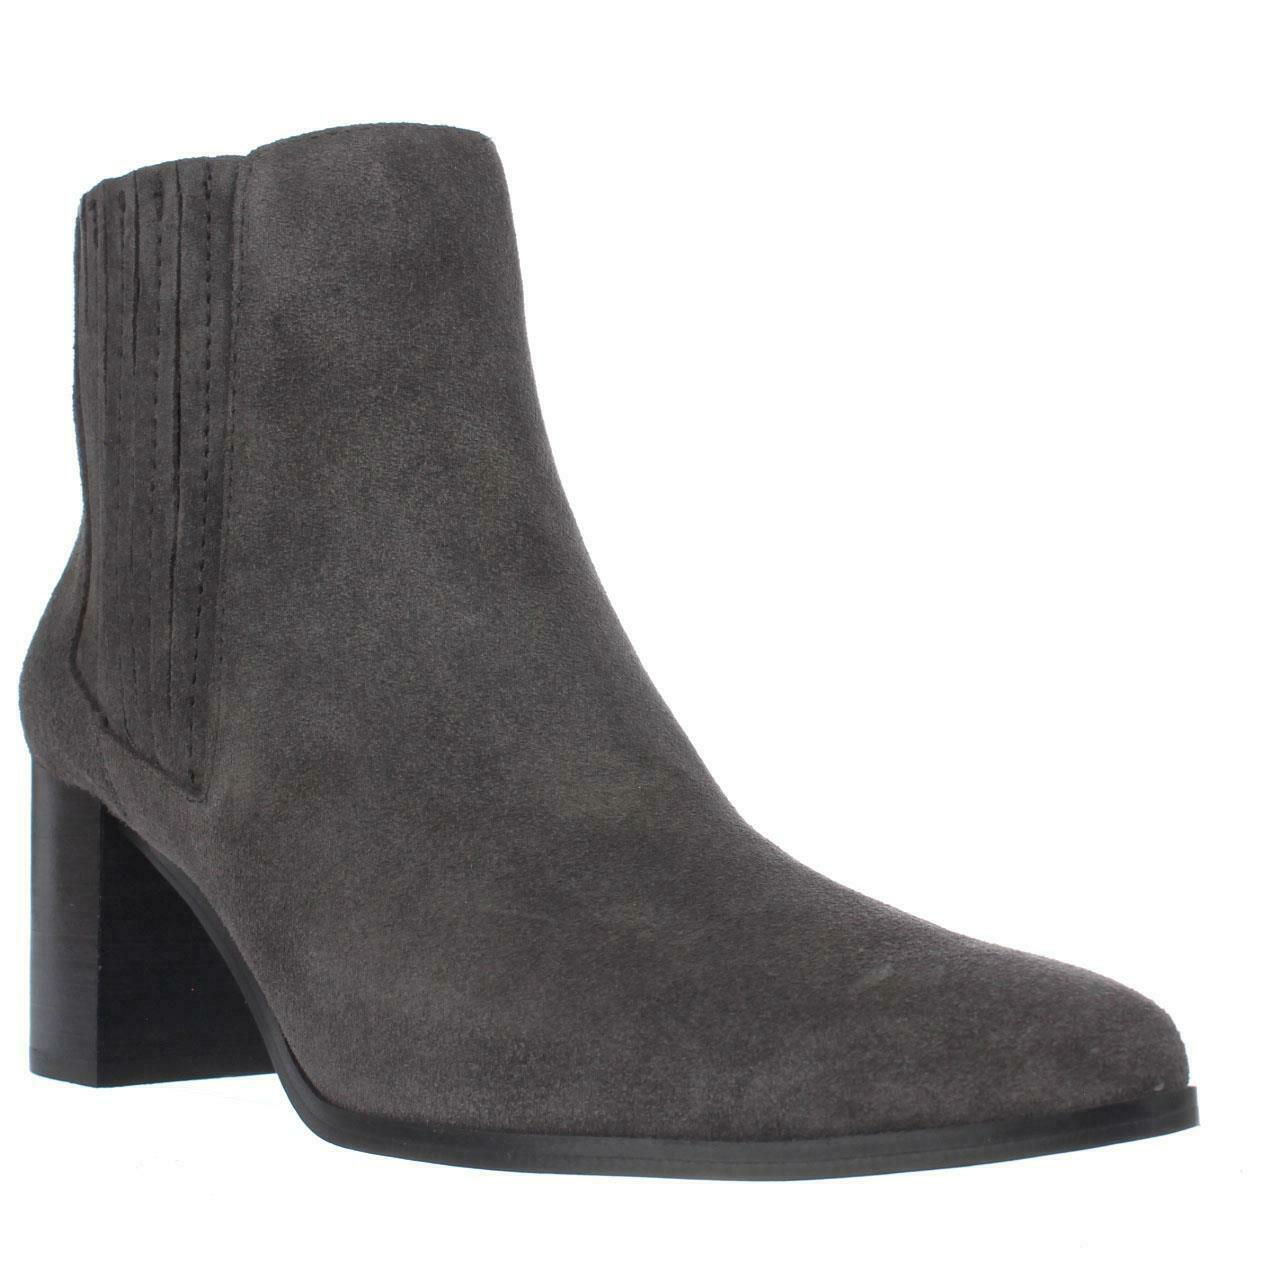 Charles by Charles David Unity Pull On Ankle Boots, Stingrey, 8.5 US ...